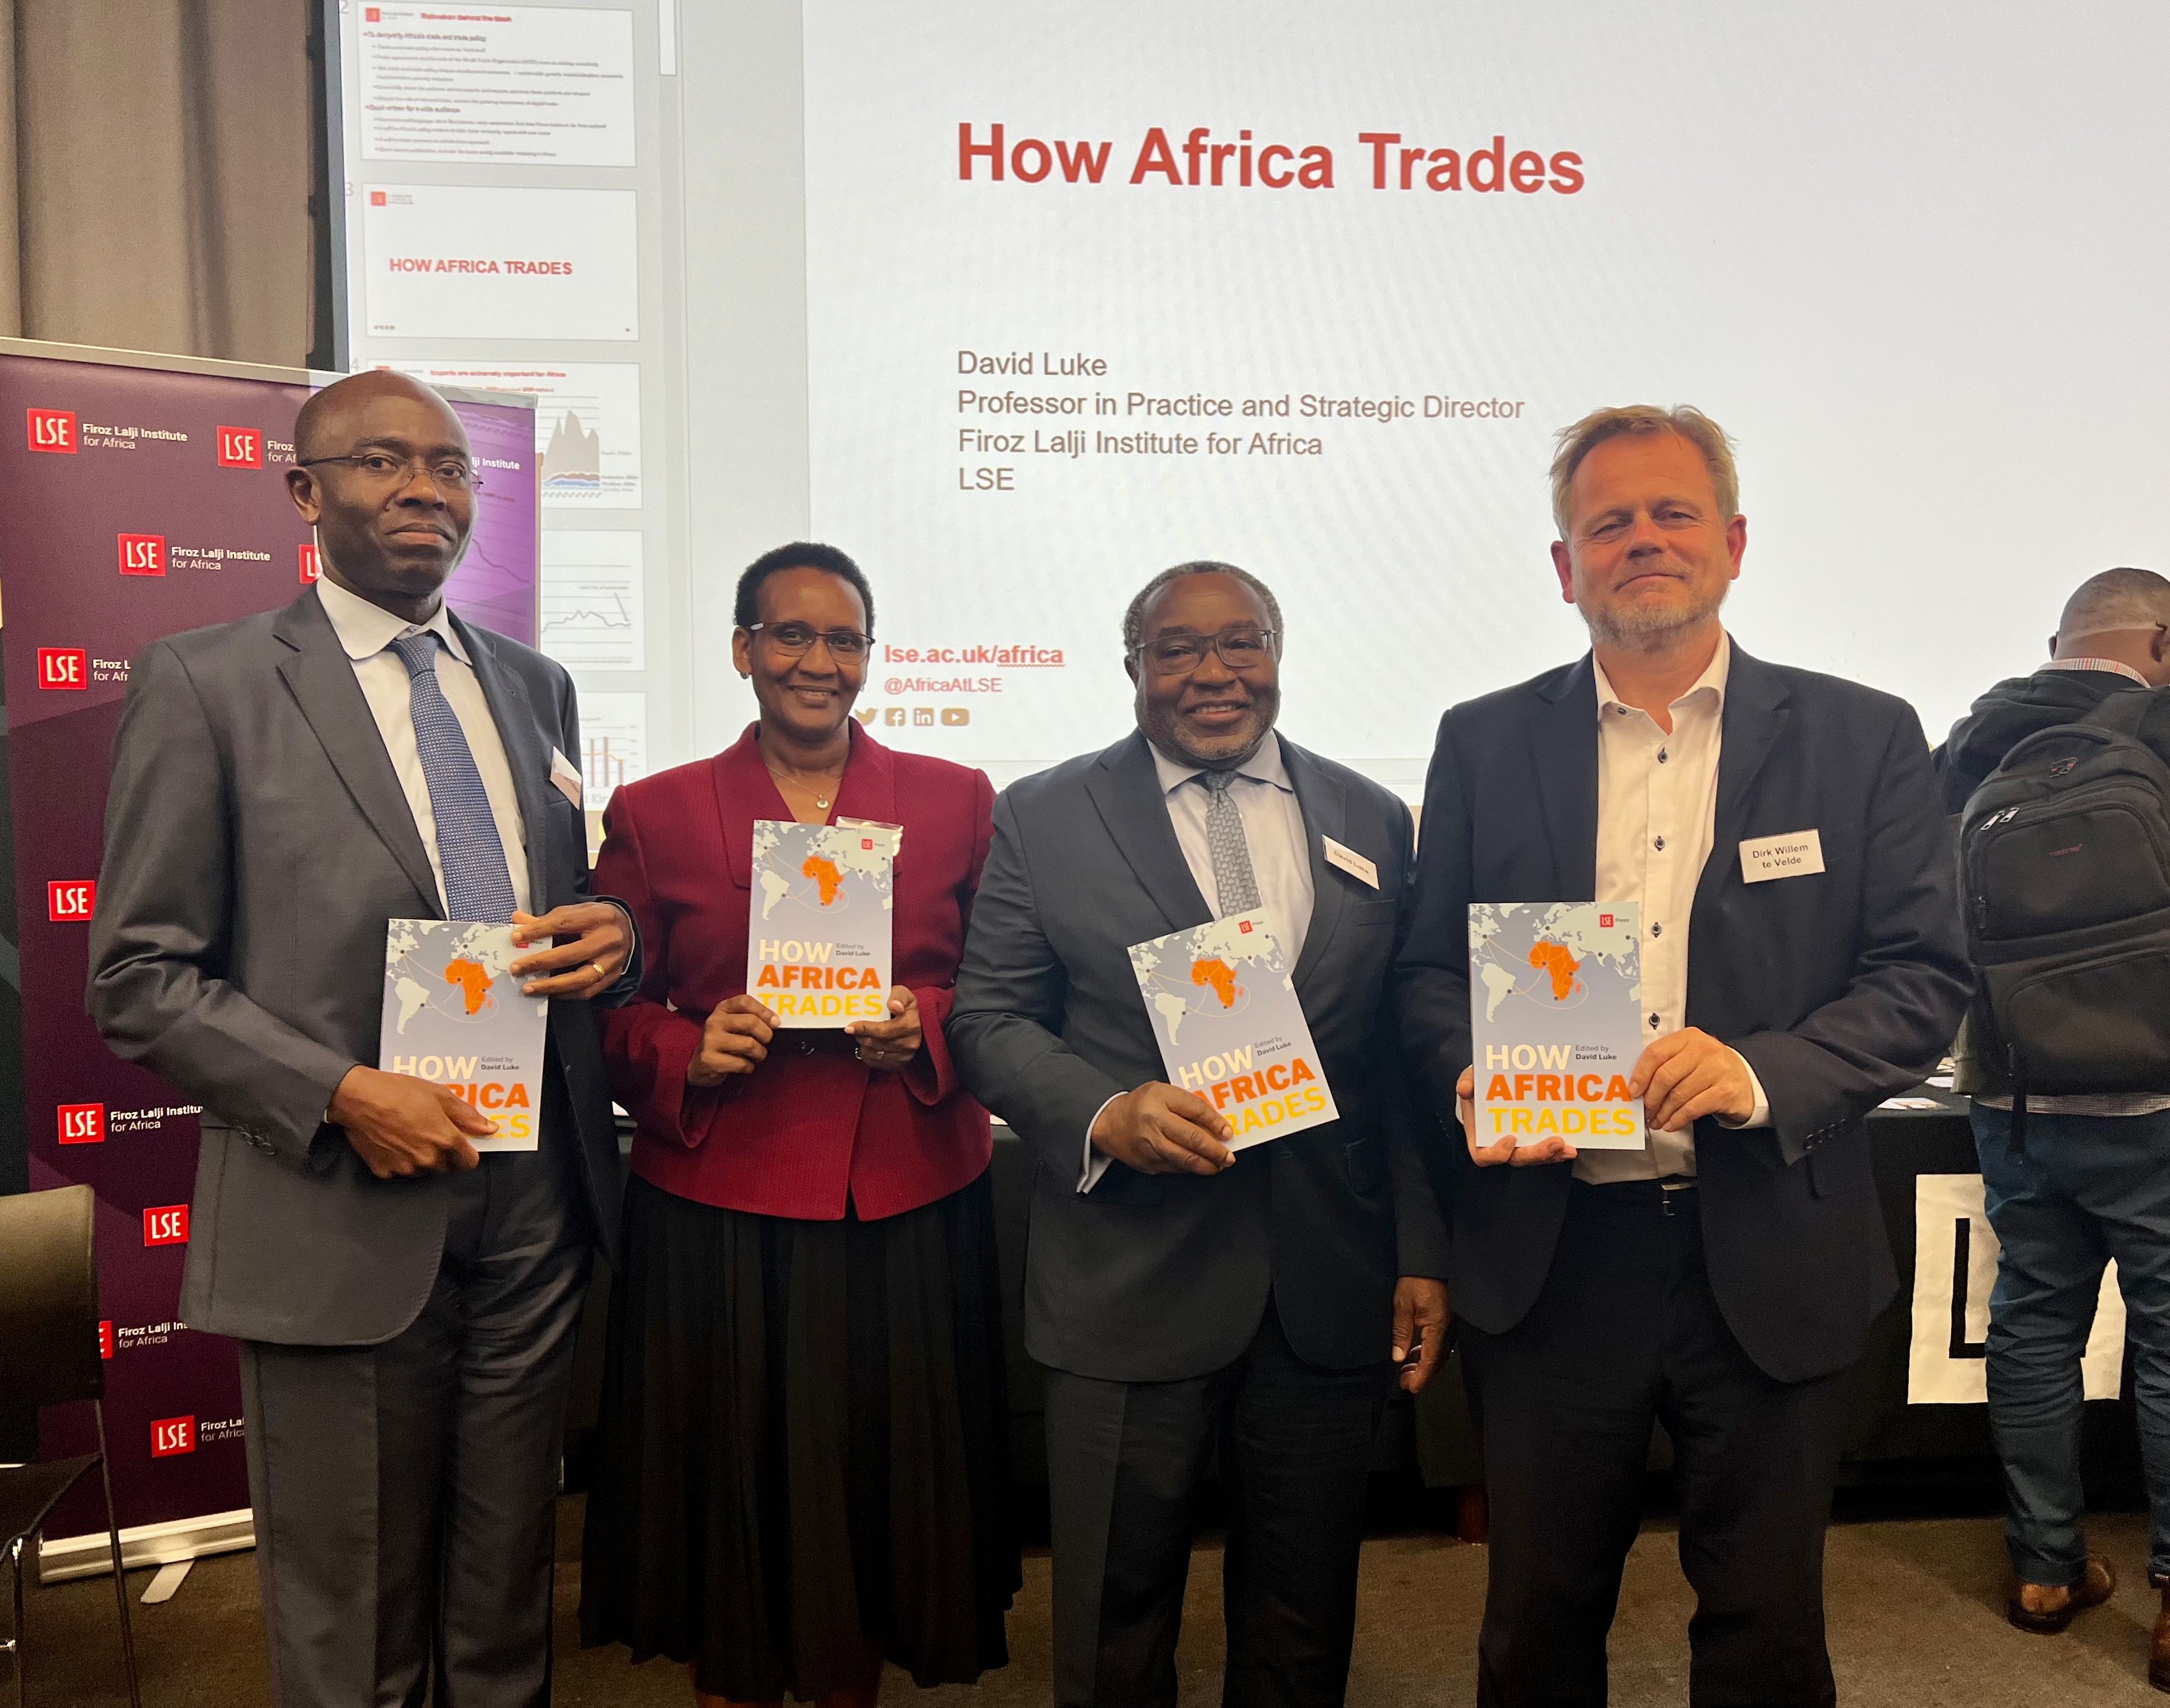 SITA Director, Prof Dirk Willem te Velde (right), with (l-r) Dr Hippolyte Fofack, Chief Economist at Afrexim Bank, Dr Christine Mwebesa, Economic Advisor for the Government of Uganda, and Prof David Luke, Professor in Practice and Strategic Director at LSE Firoz Lalji Institute for Africa